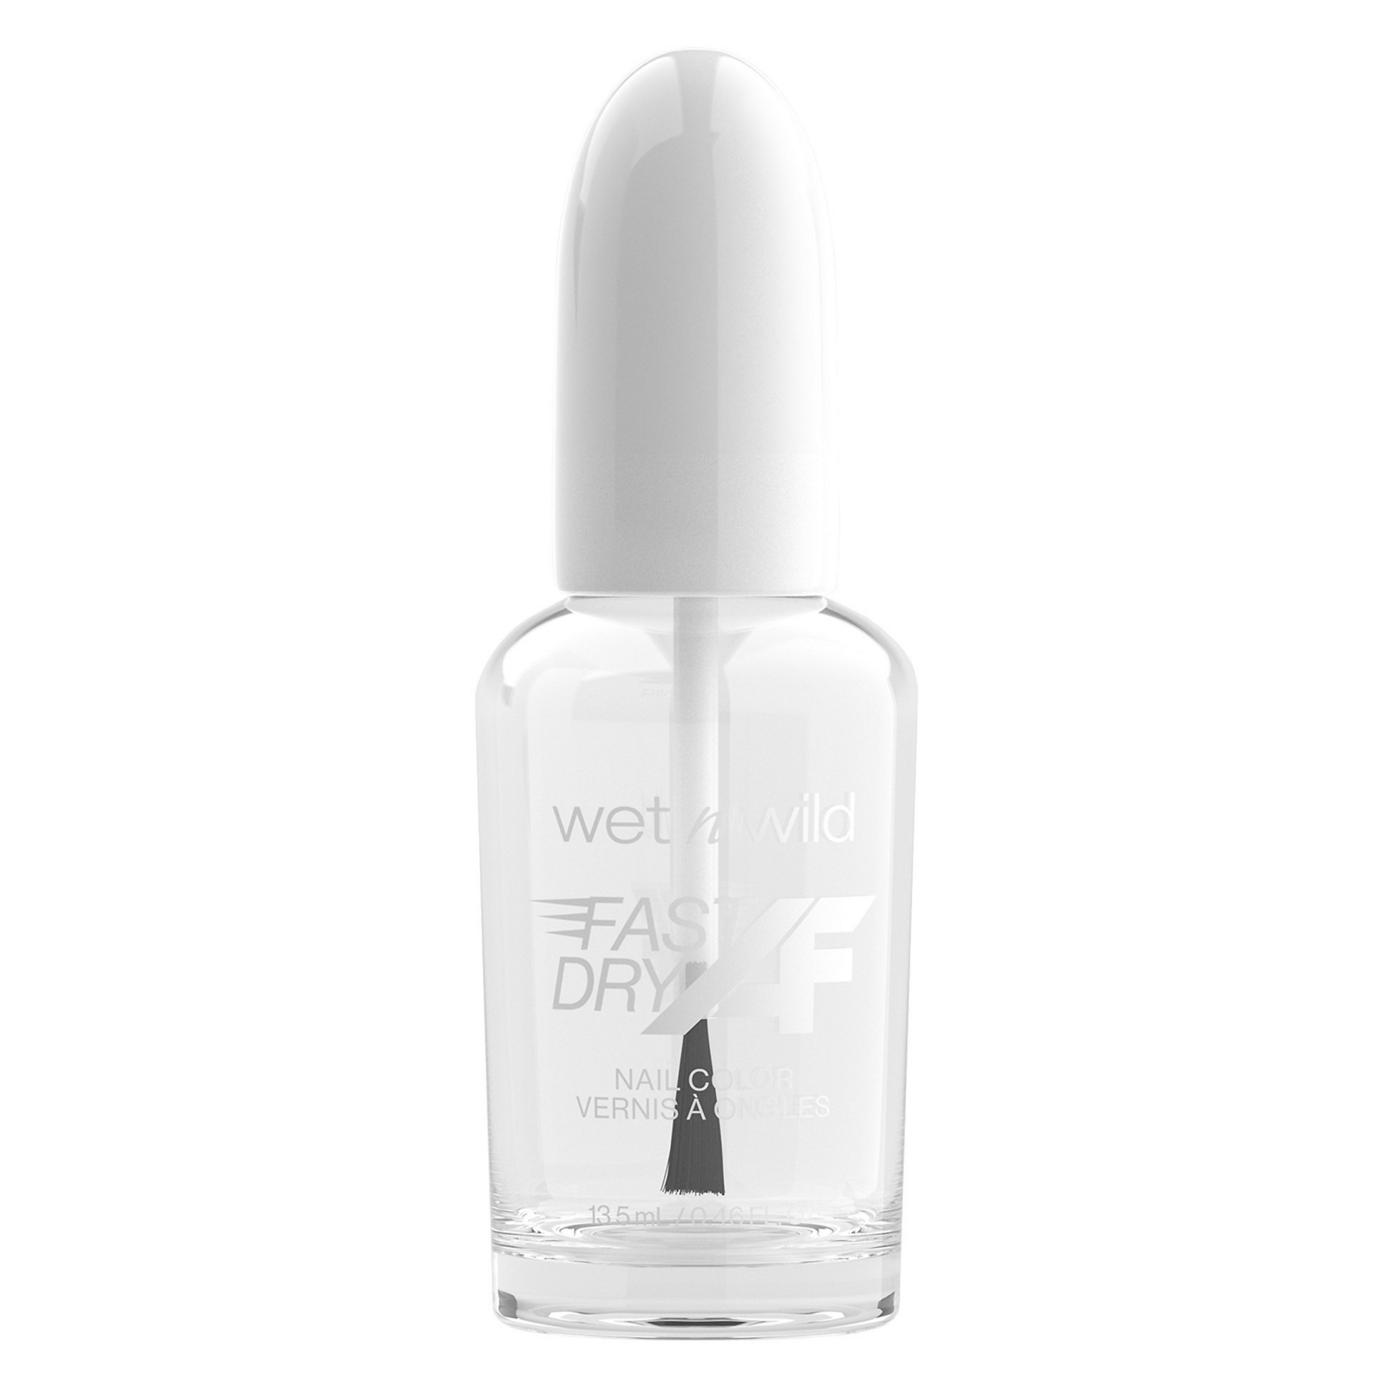 Wet n Wild Fast Dry AF Nail Color X-Ray Vision; image 1 of 3